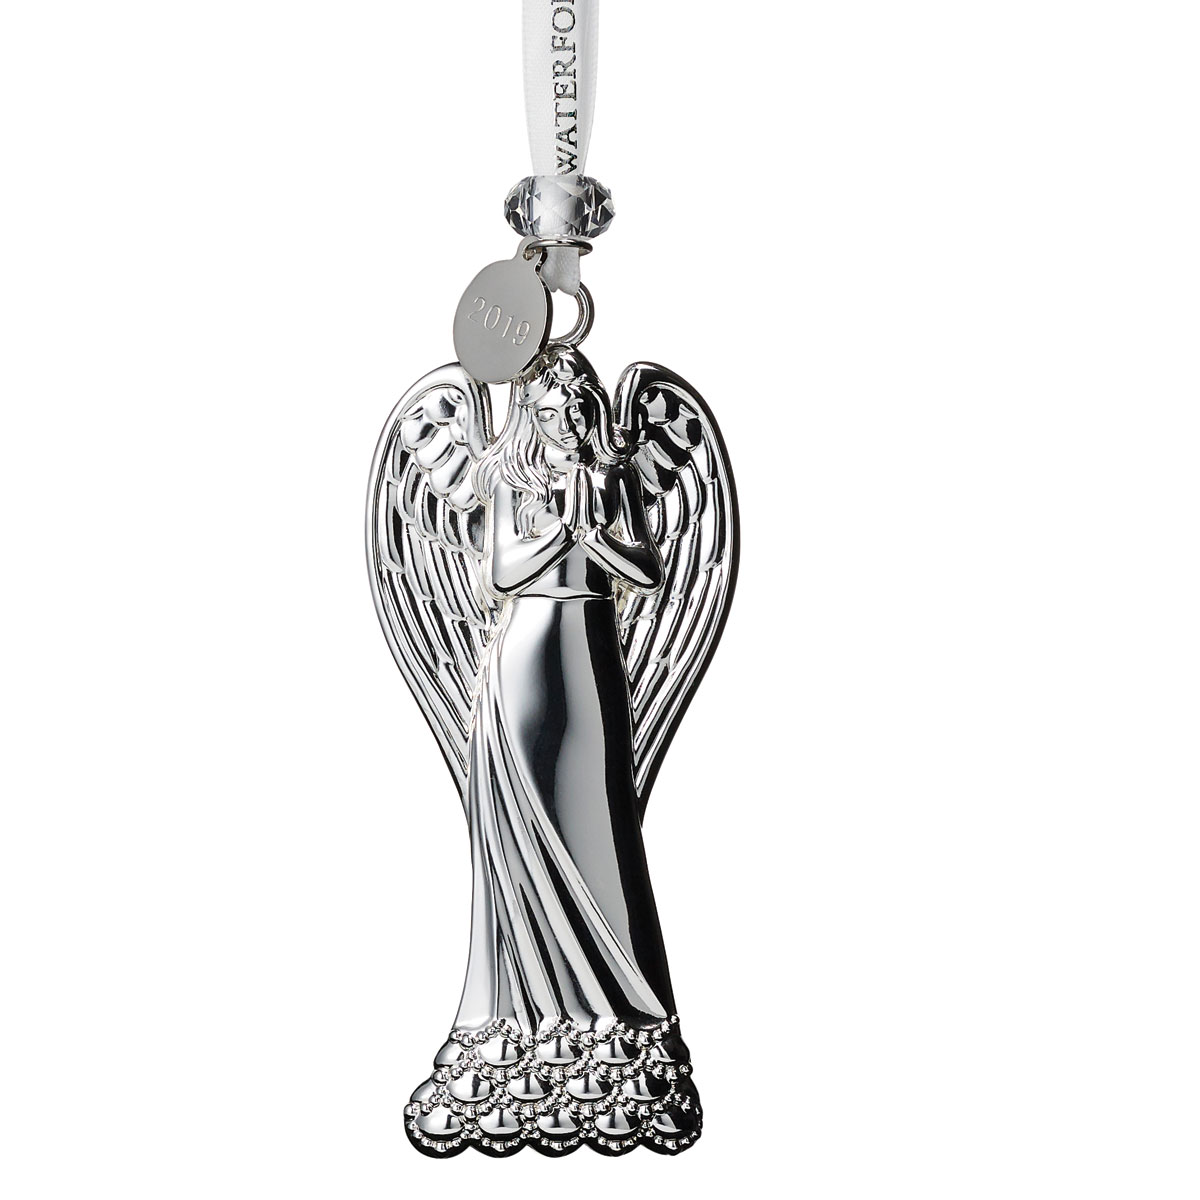 Waterford 2019 Silver Angel Ornament